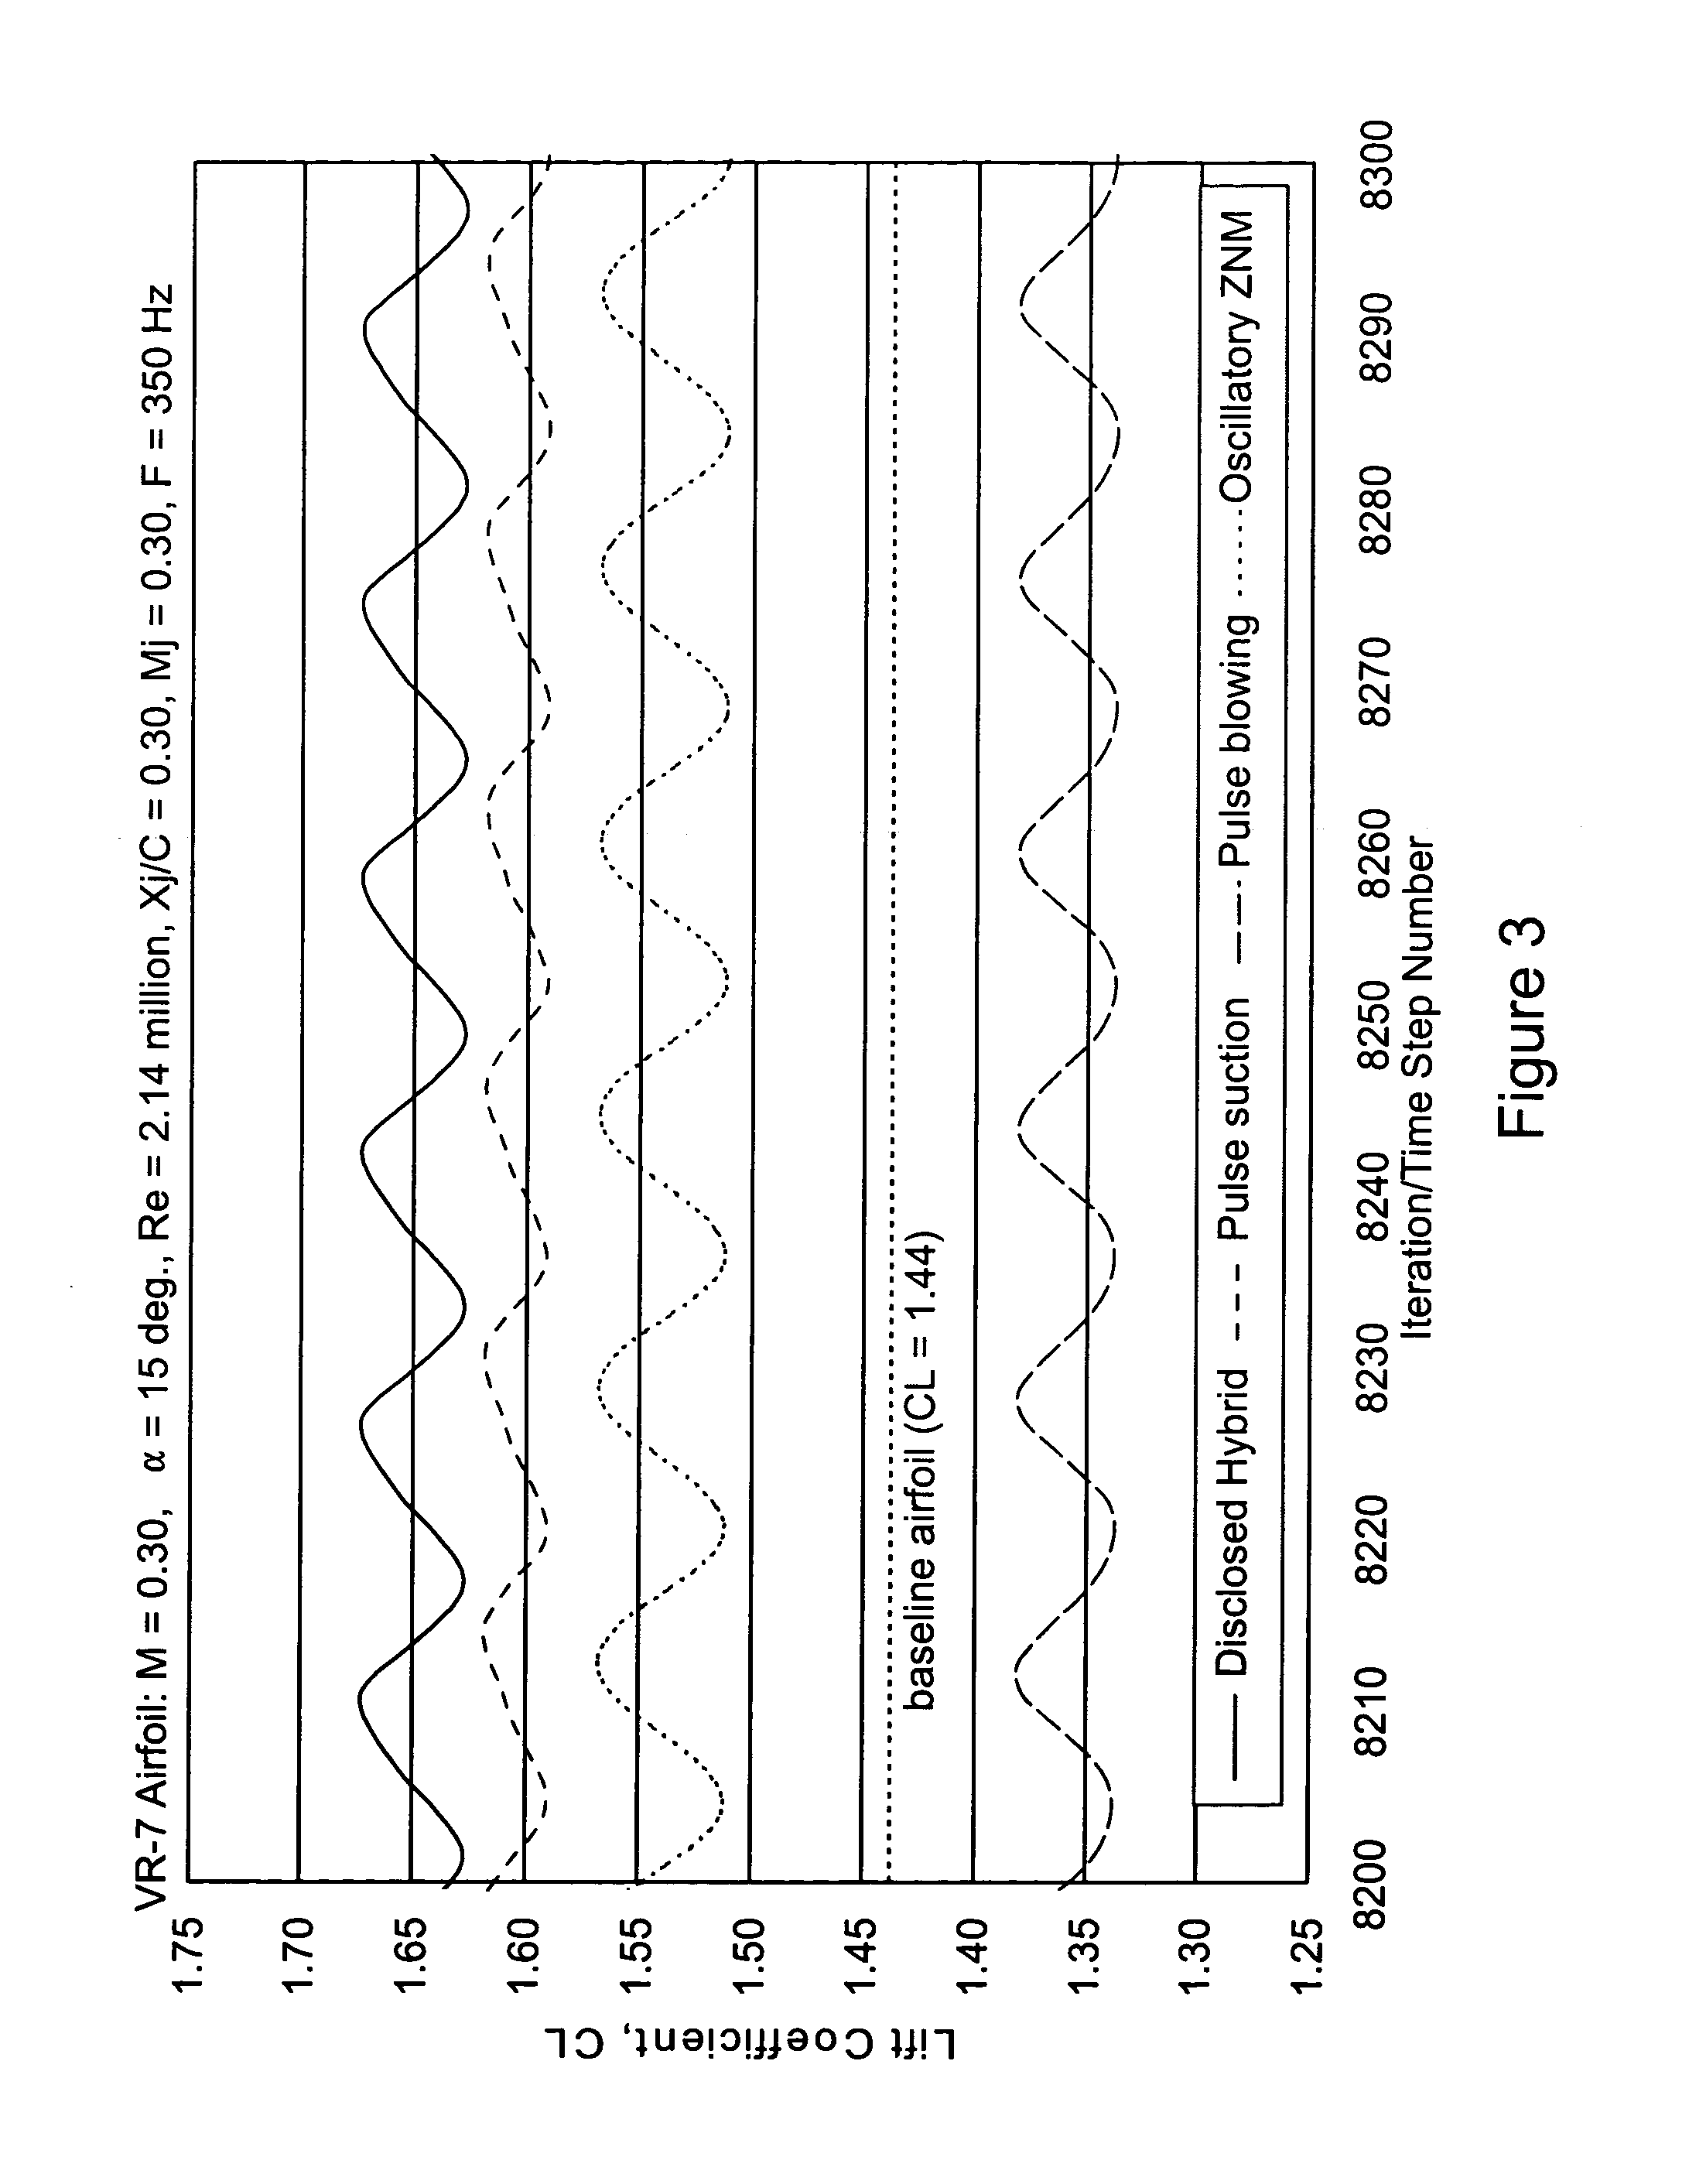 Method and device for altering the separation characteristics of flow over an aerodynamic surface via hybrid intermittent blowing and suction